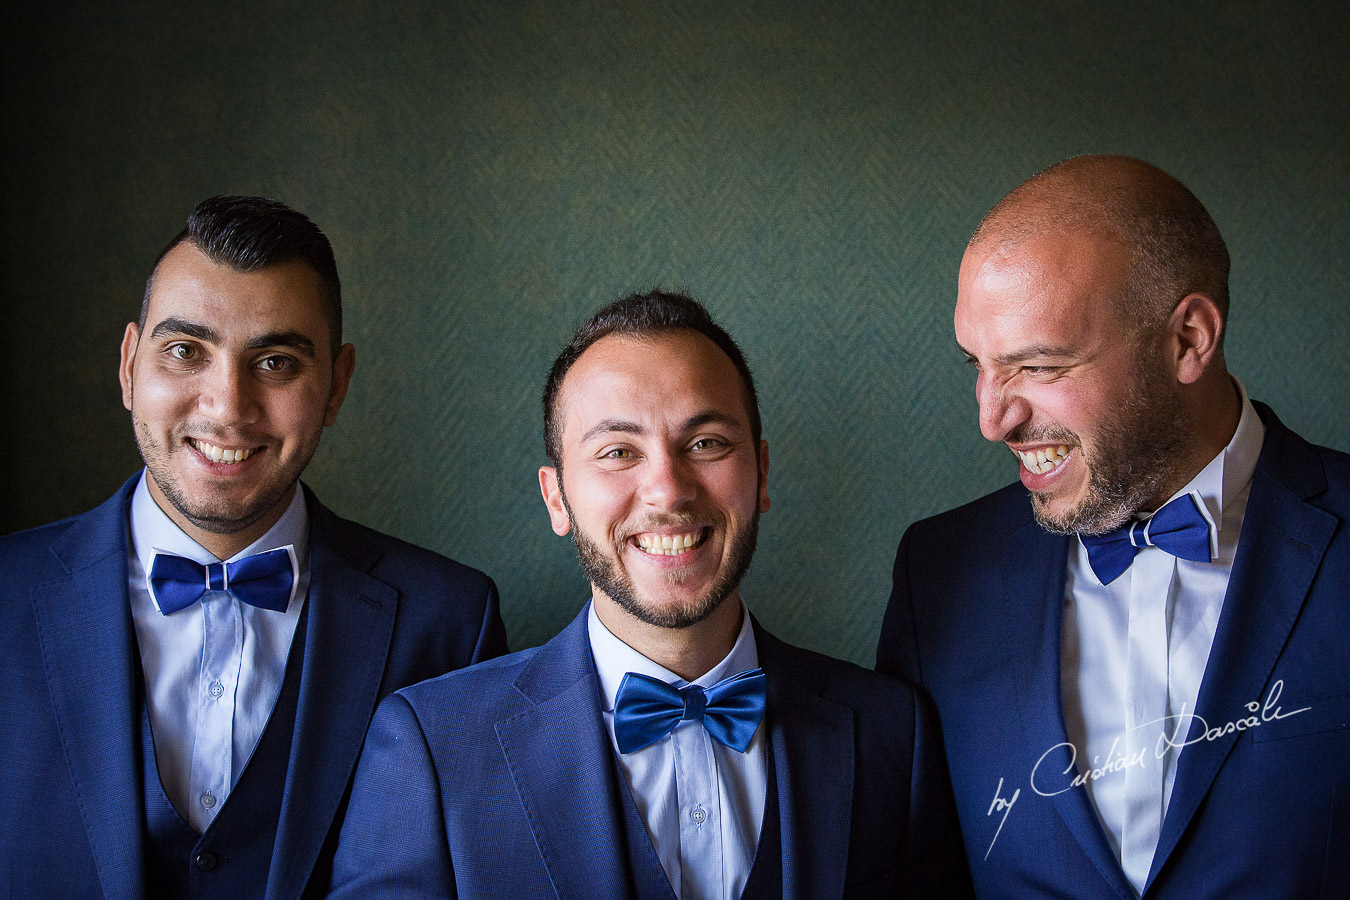 Groom and bestmen posing during getting ready as part of an Exclusive Wedding photography at the Grand Resort Limassol, captured by Cyprus Wedding Photographer Cristian Dascalu.